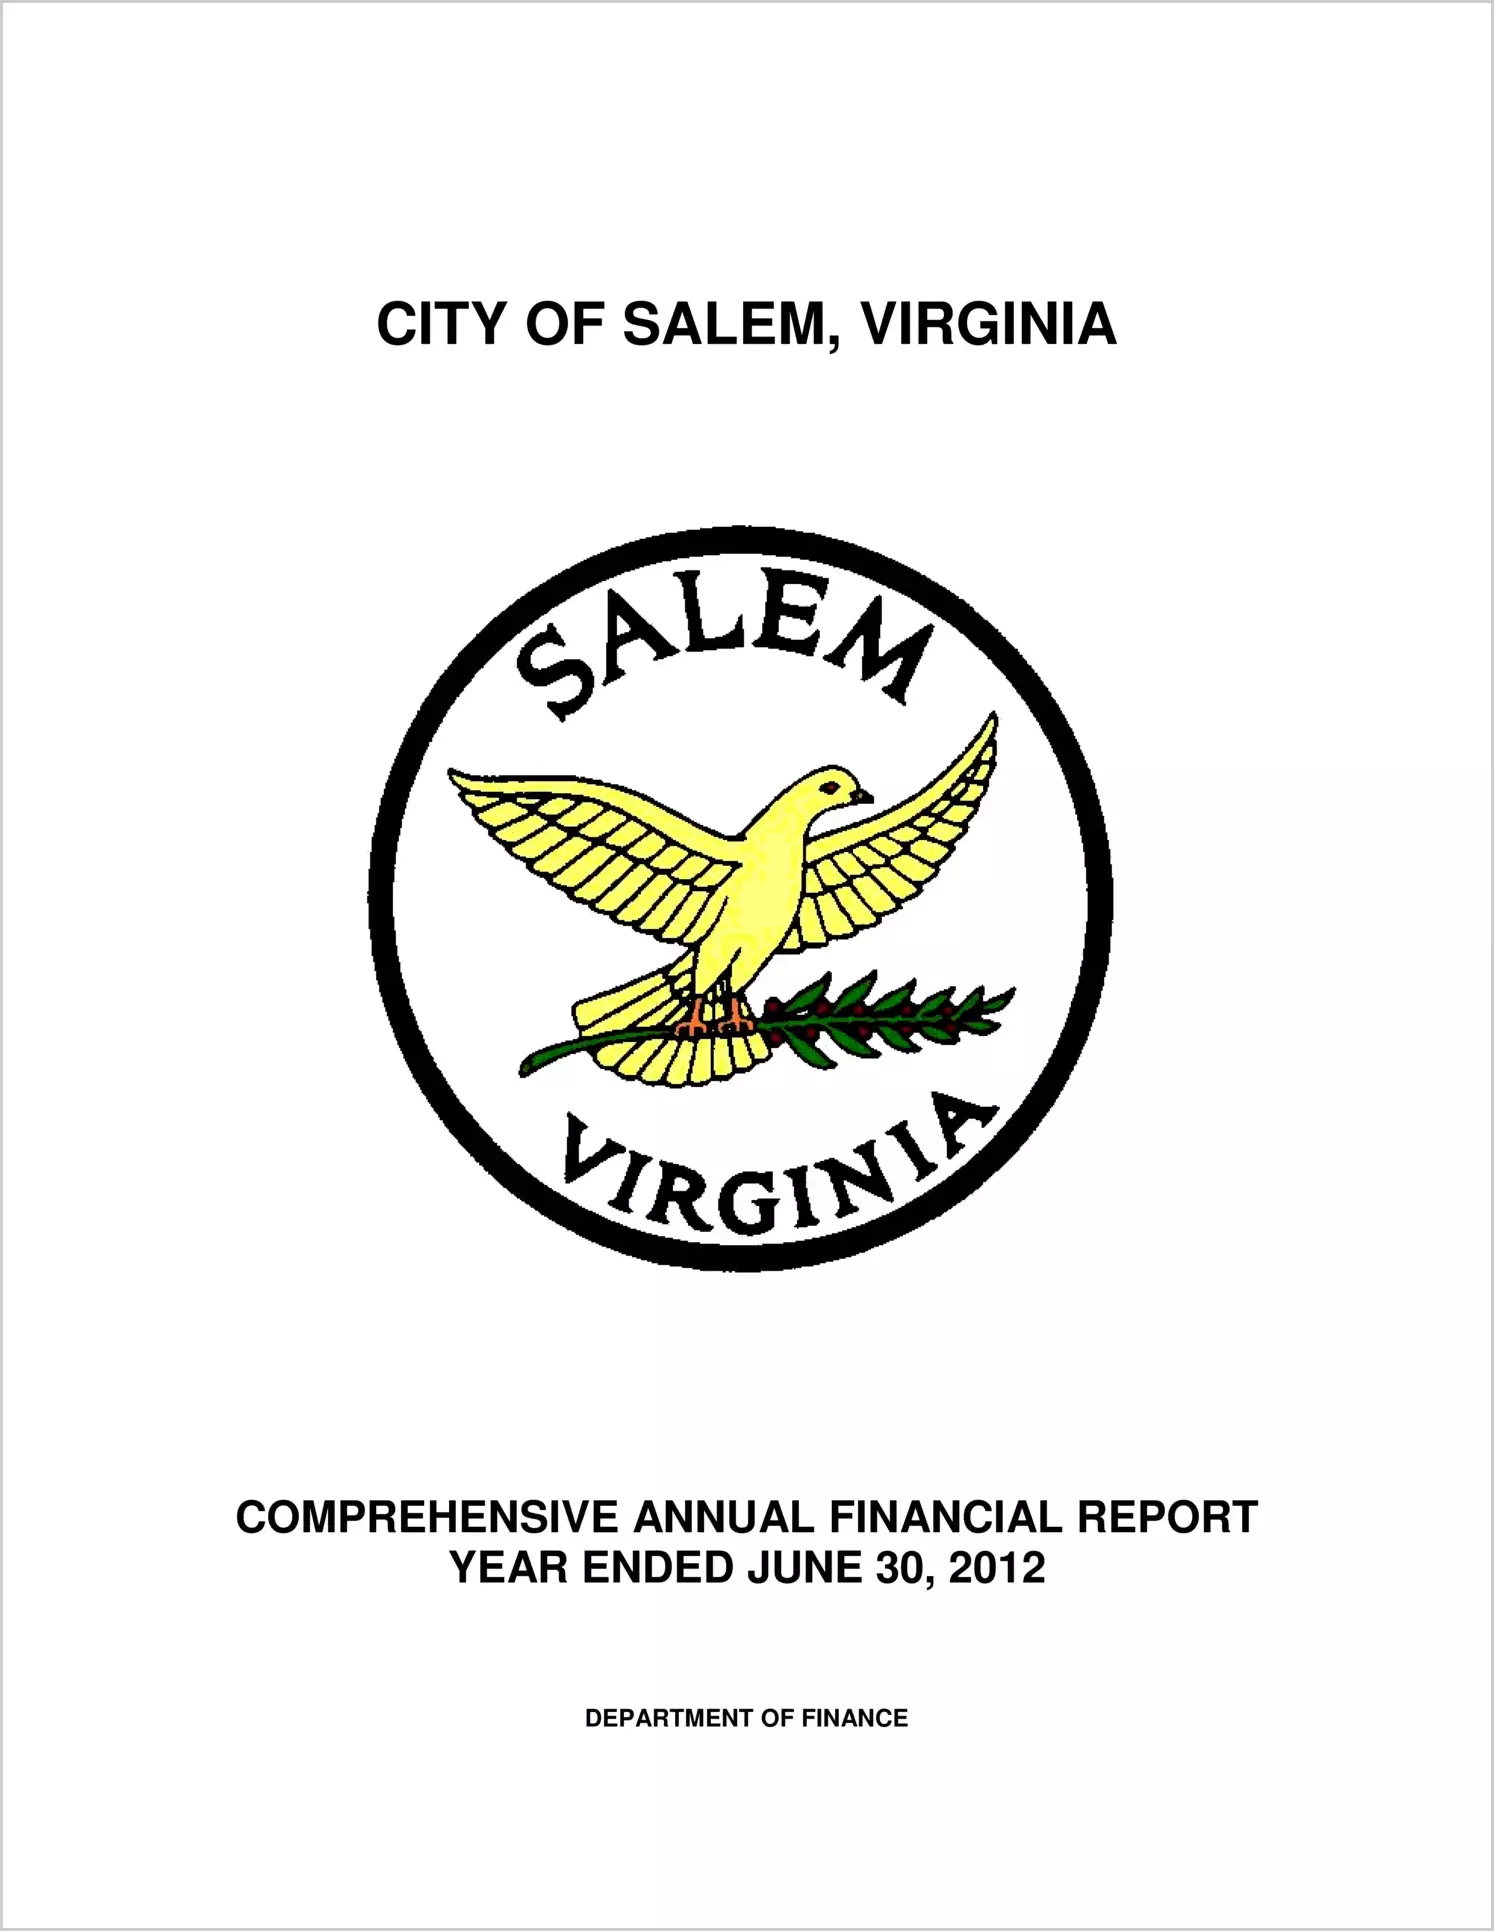 2012 Annual Financial Report for City of Salem